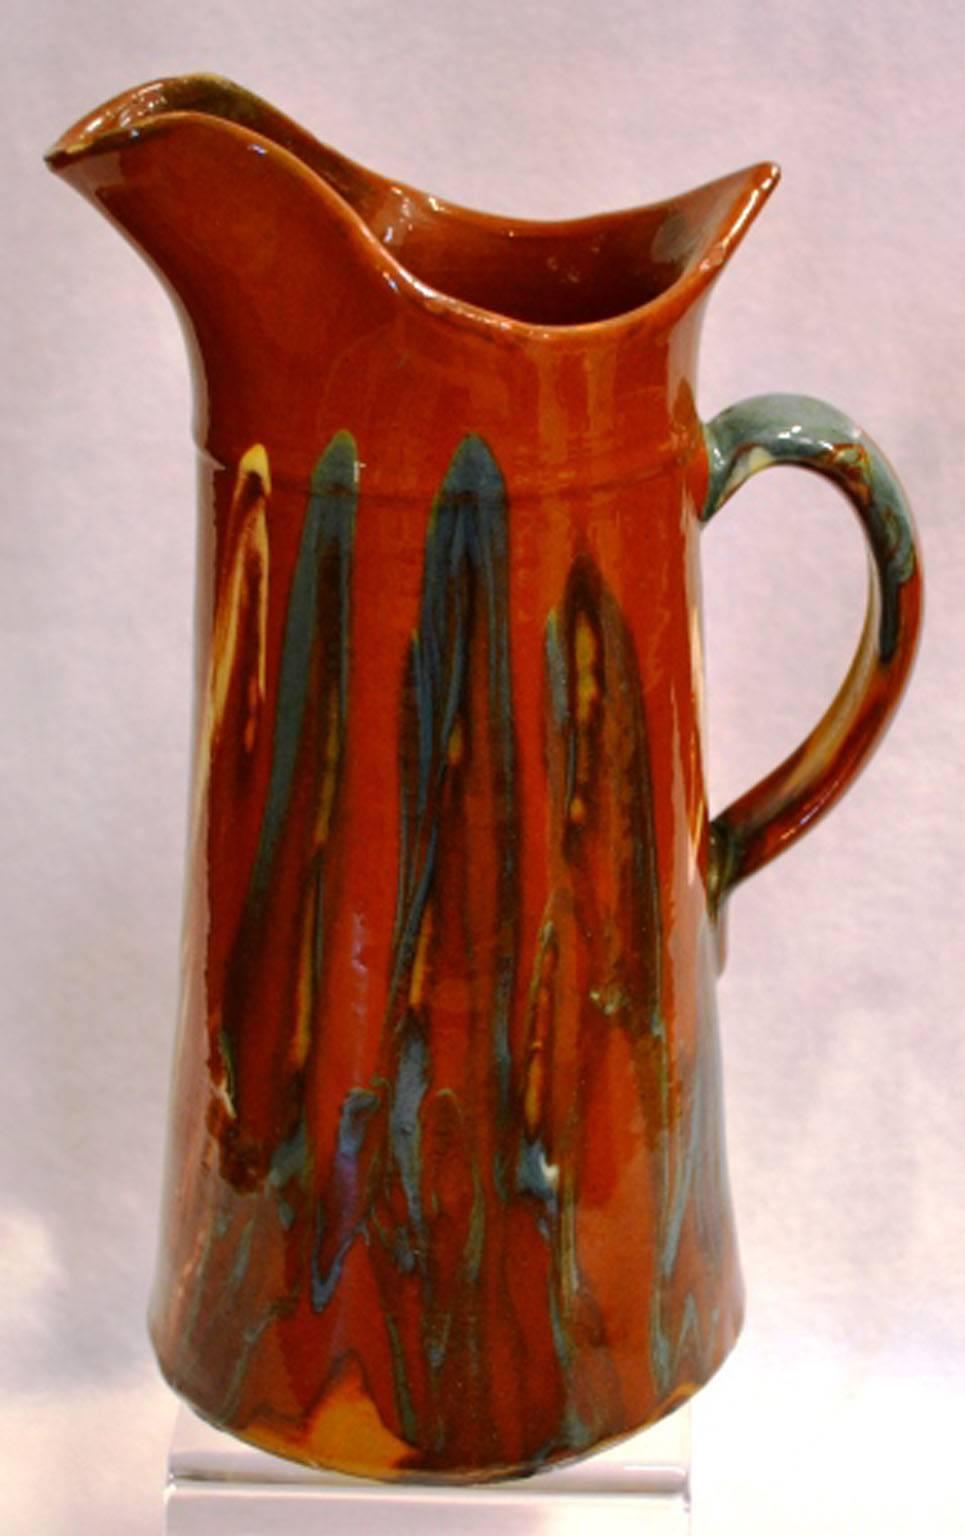 Turn of the century glazed pitcher with dripped and tapered blue painted motif with wide lip for pouring. Possibly Jaspe. Once a common piece of pottery used daily in French kitchens, these earthenware jugs have become showcase pieces sought by